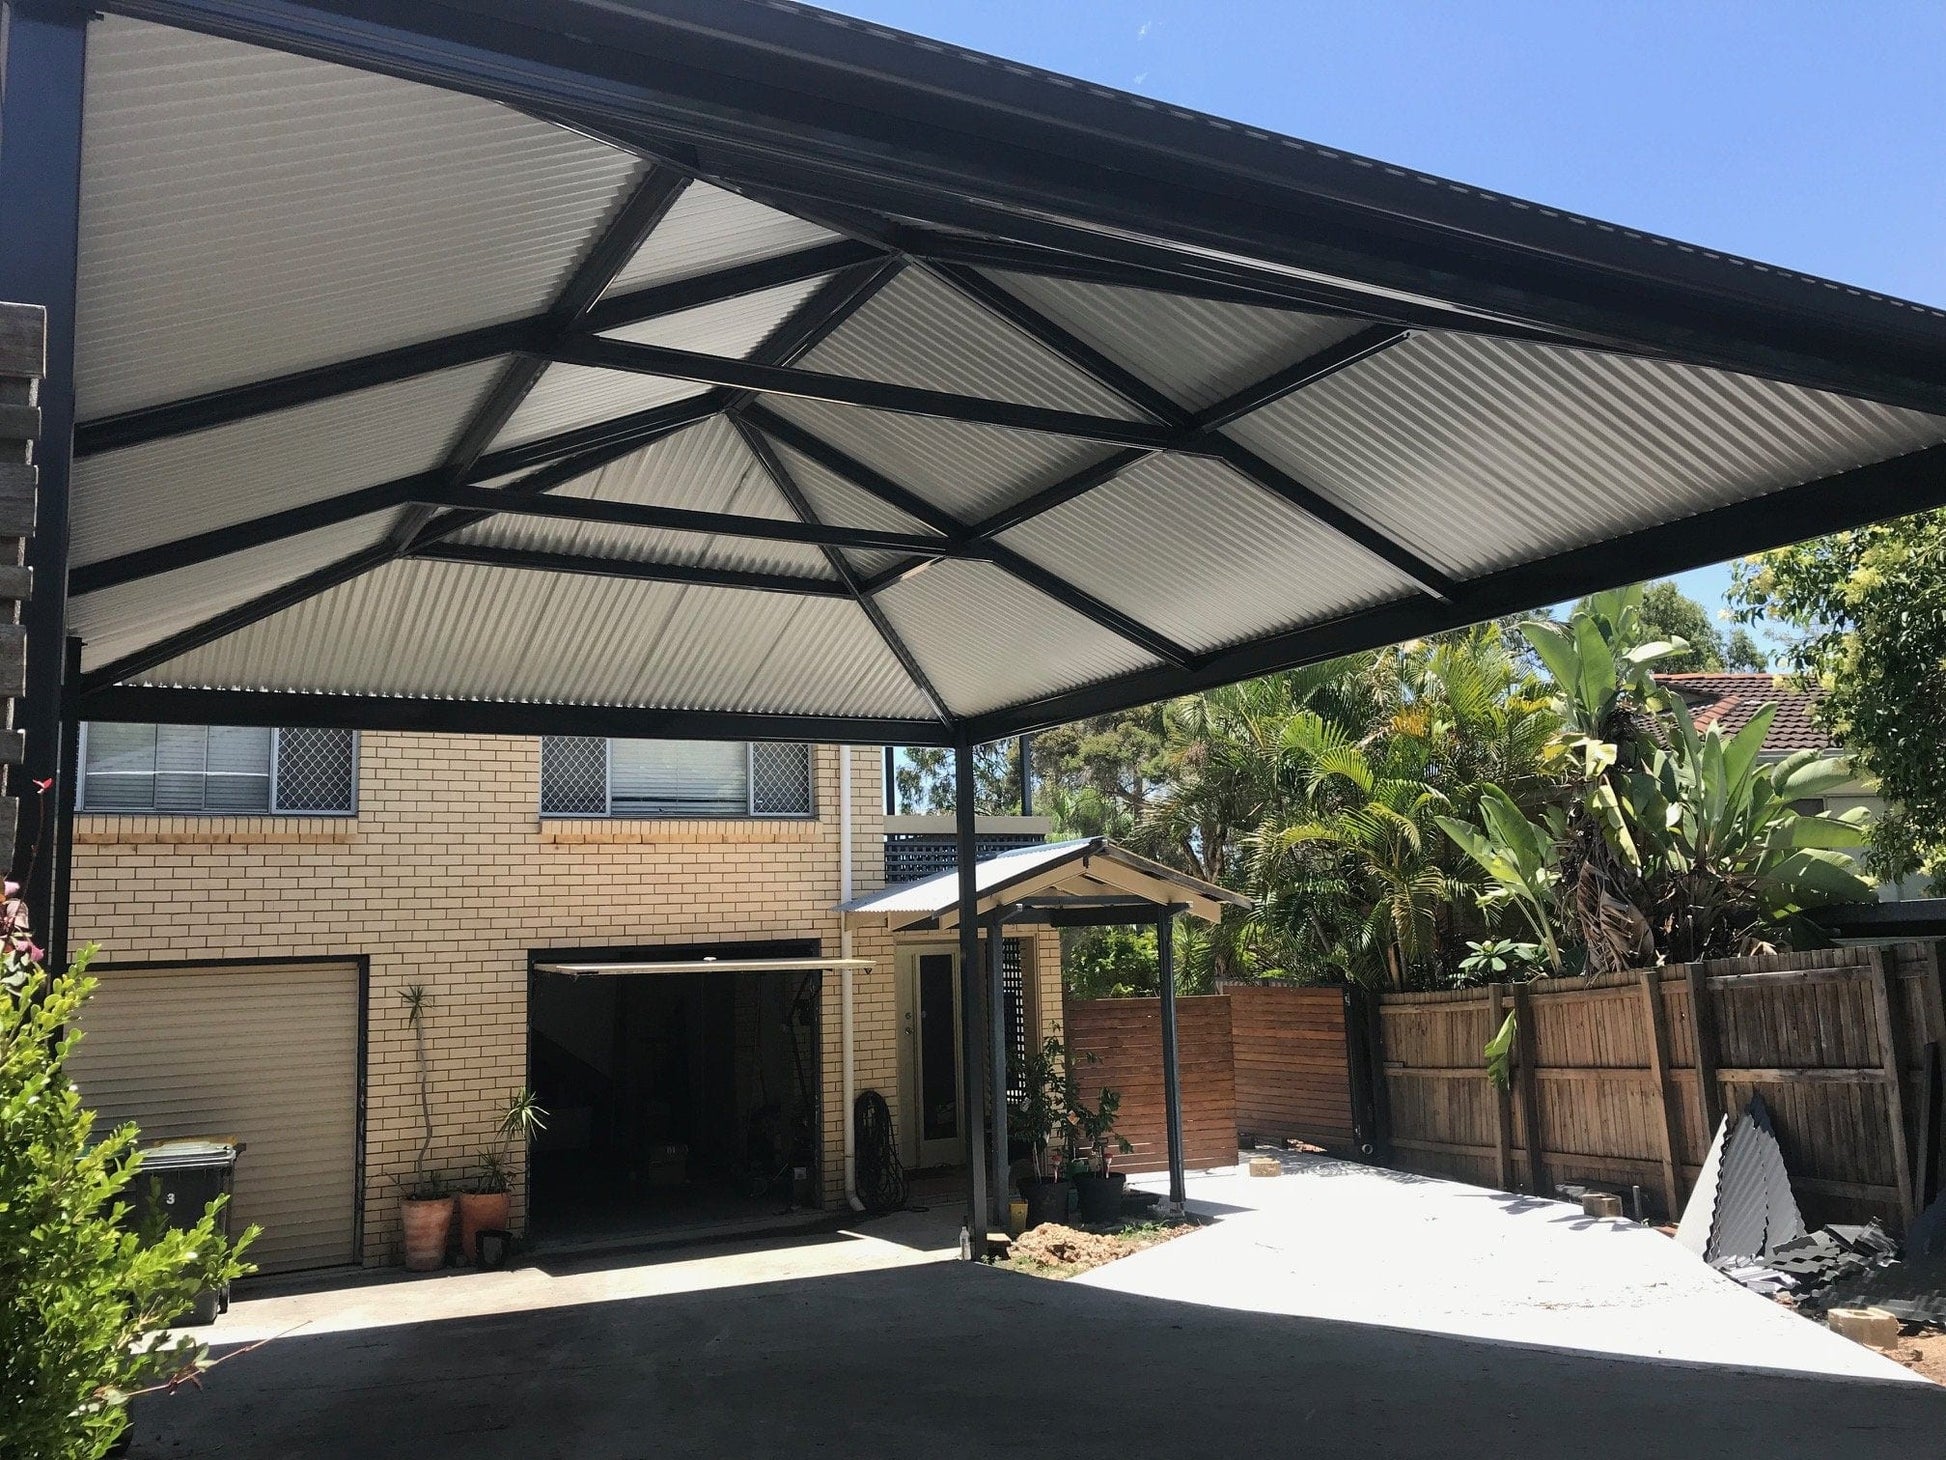 Insulated Gable Patio - 9m x 5m - Supply & Install QHI National